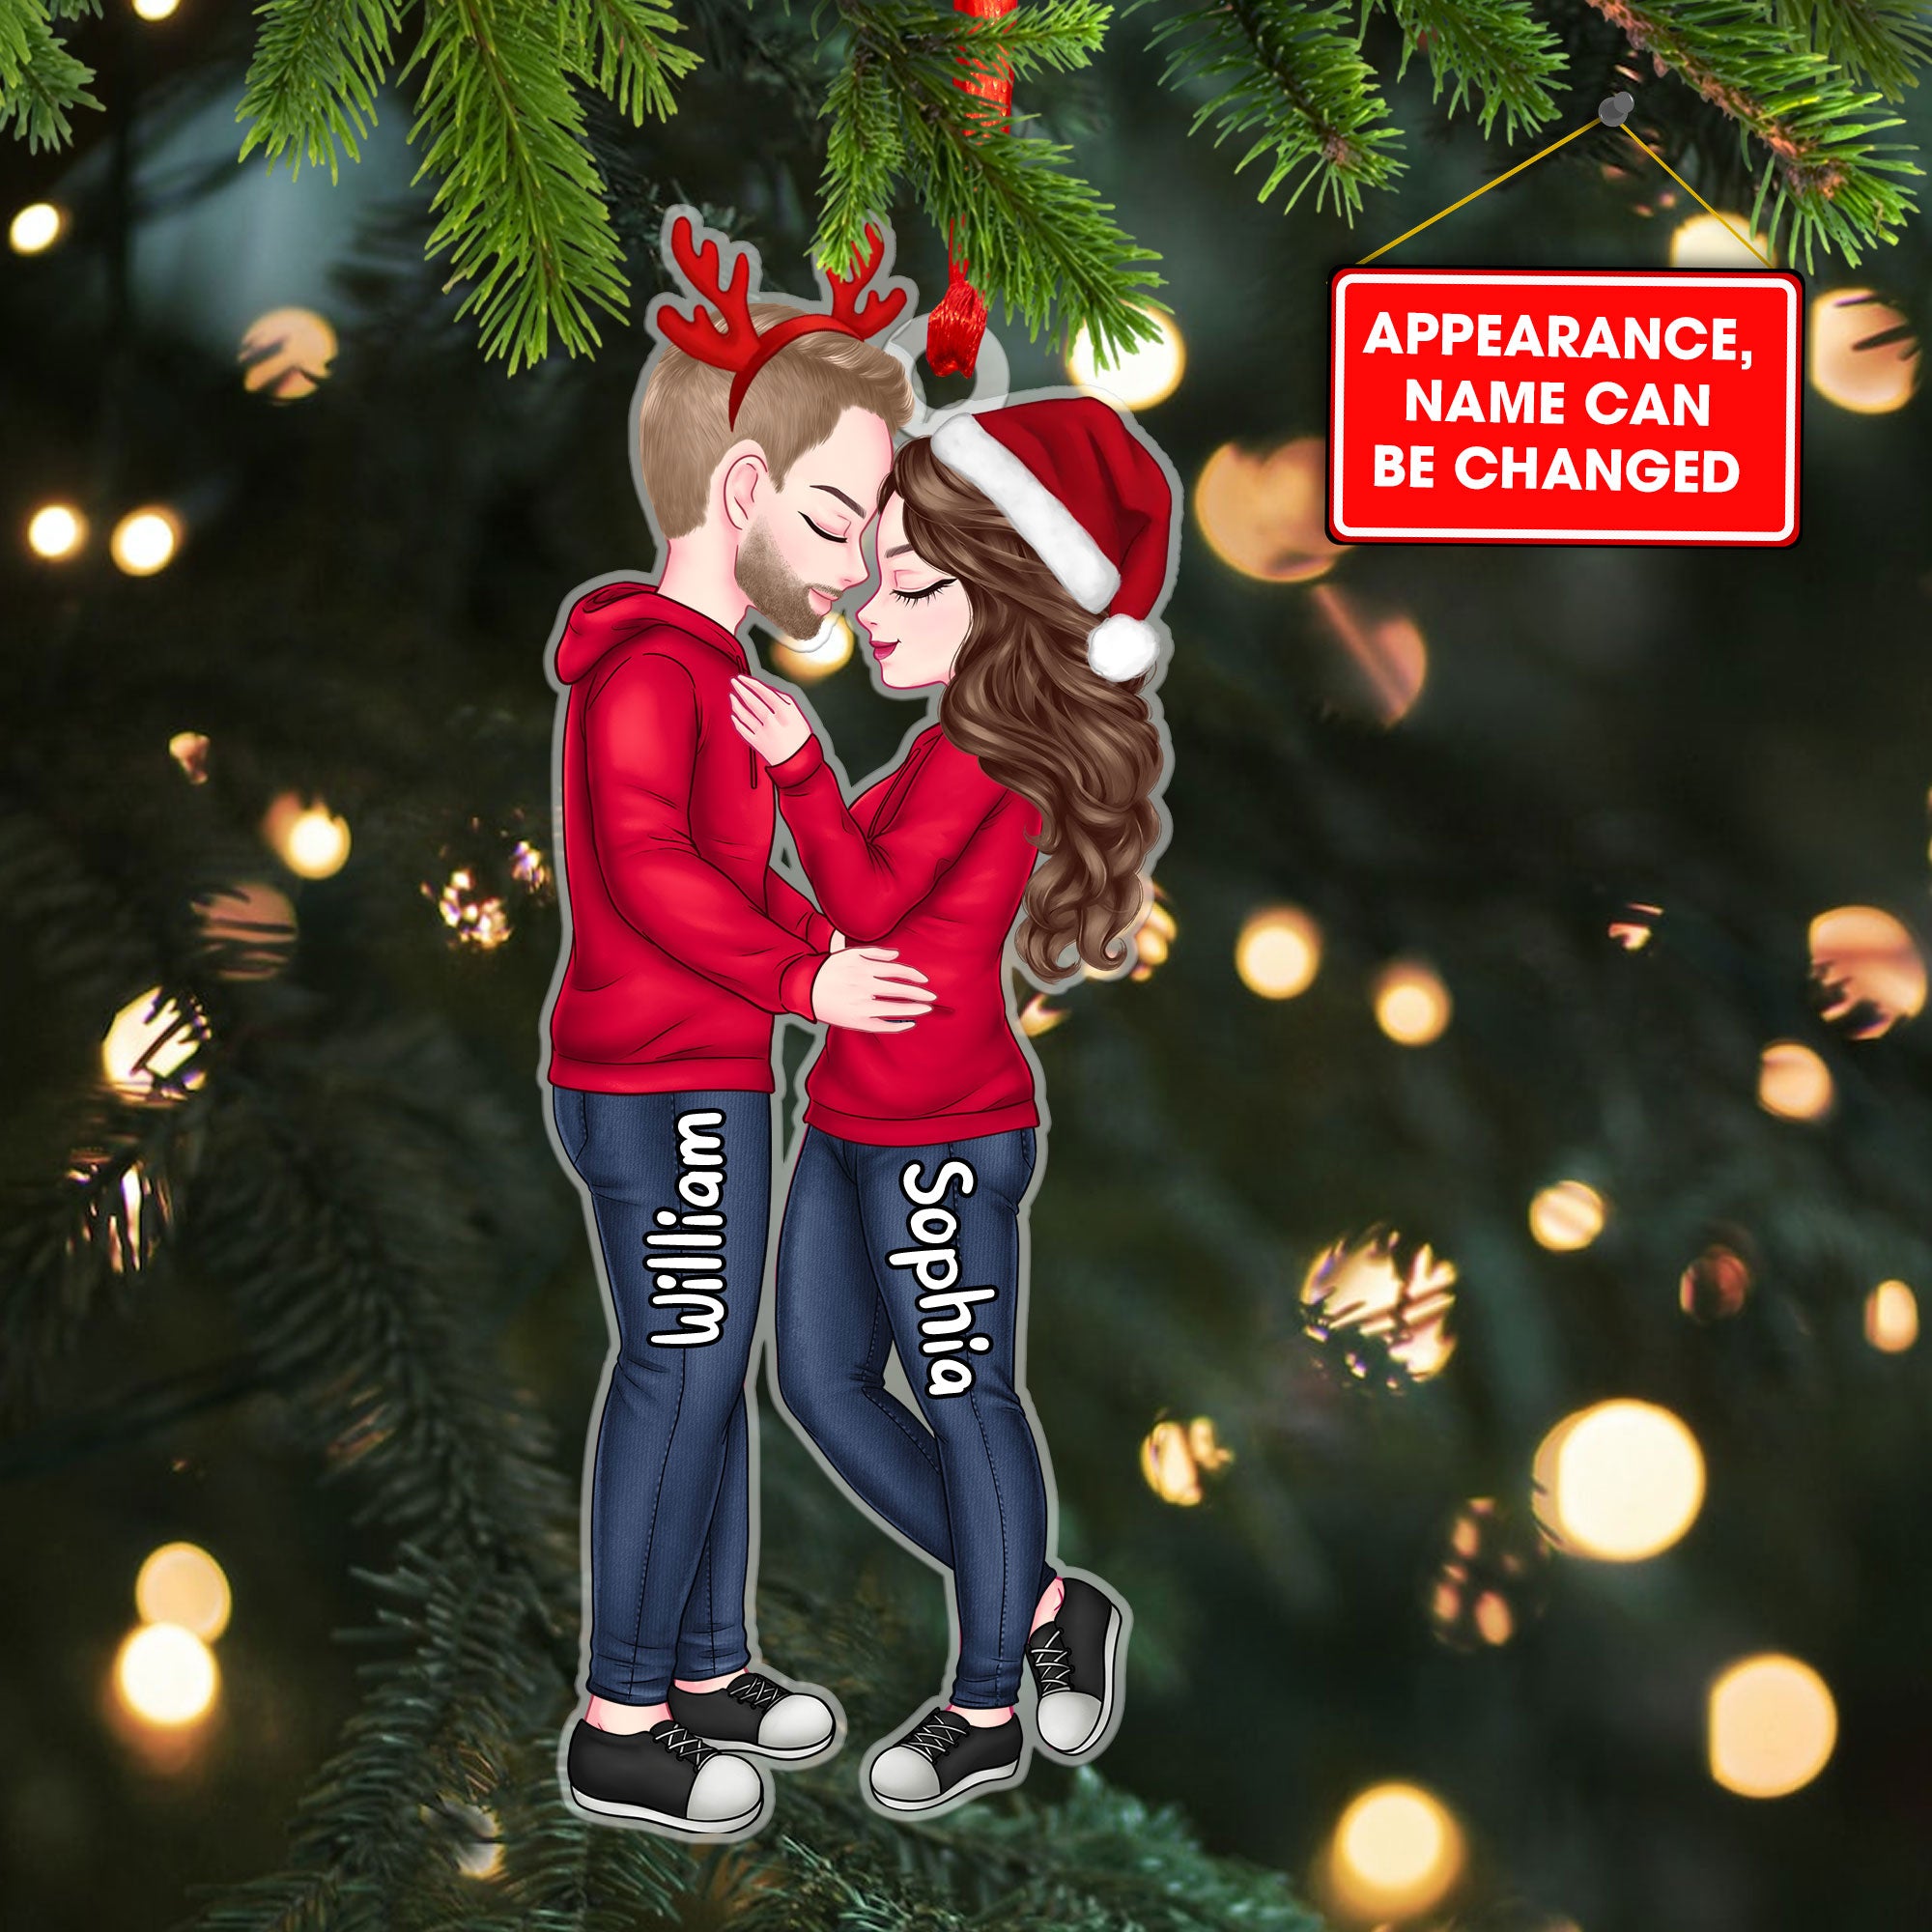 Couple Ornament - Custom Appearance, Personalized Acrylic Ornament - Gift For Christmas, CoupleGift, Family Gift